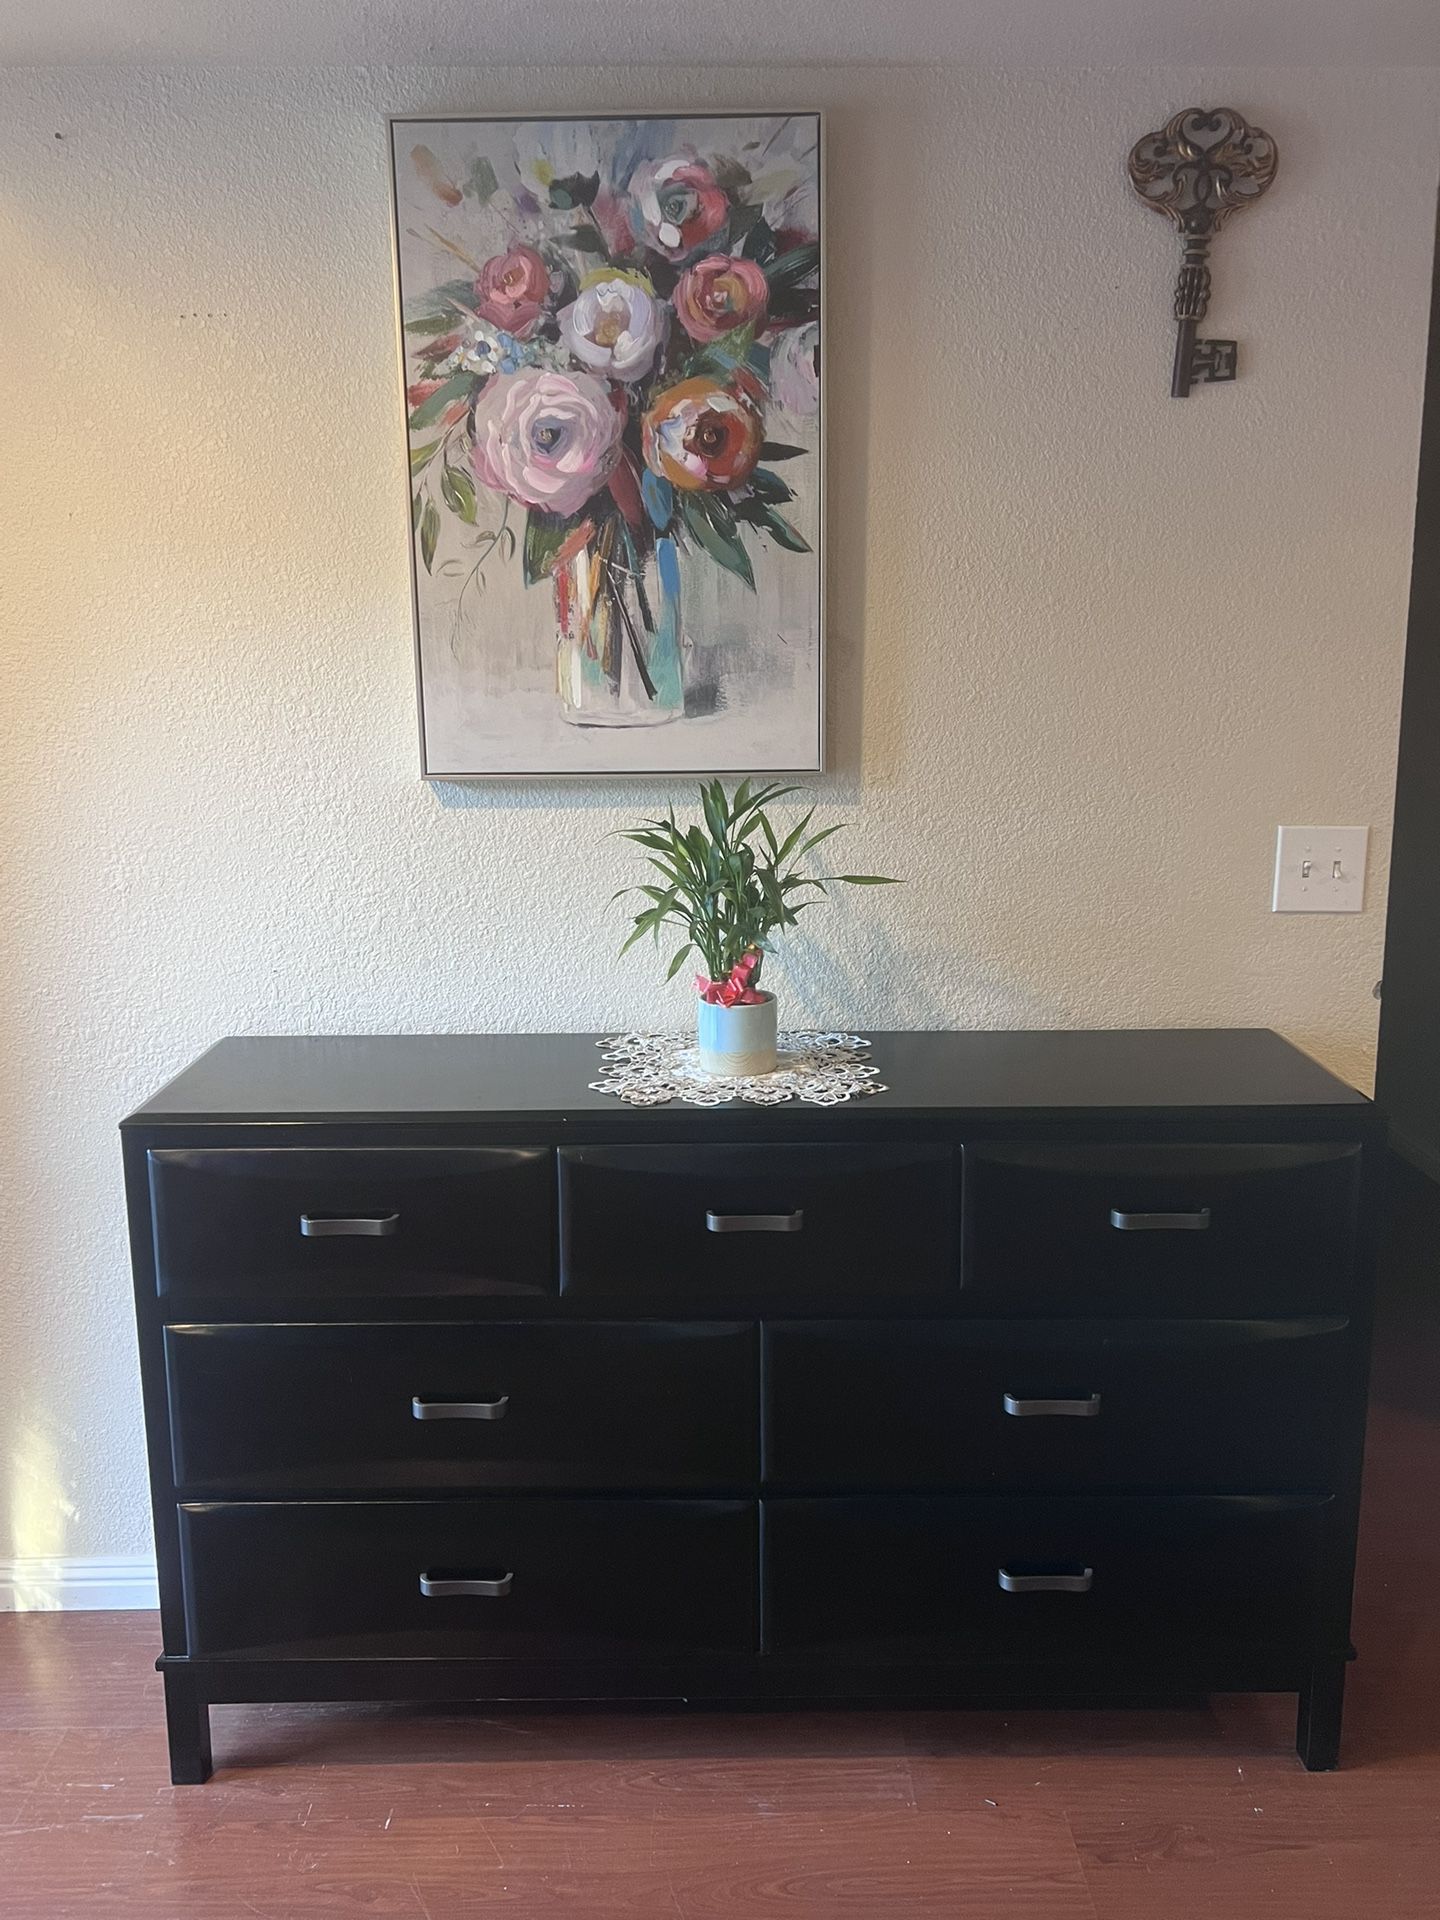 dresser, with 7 drawers